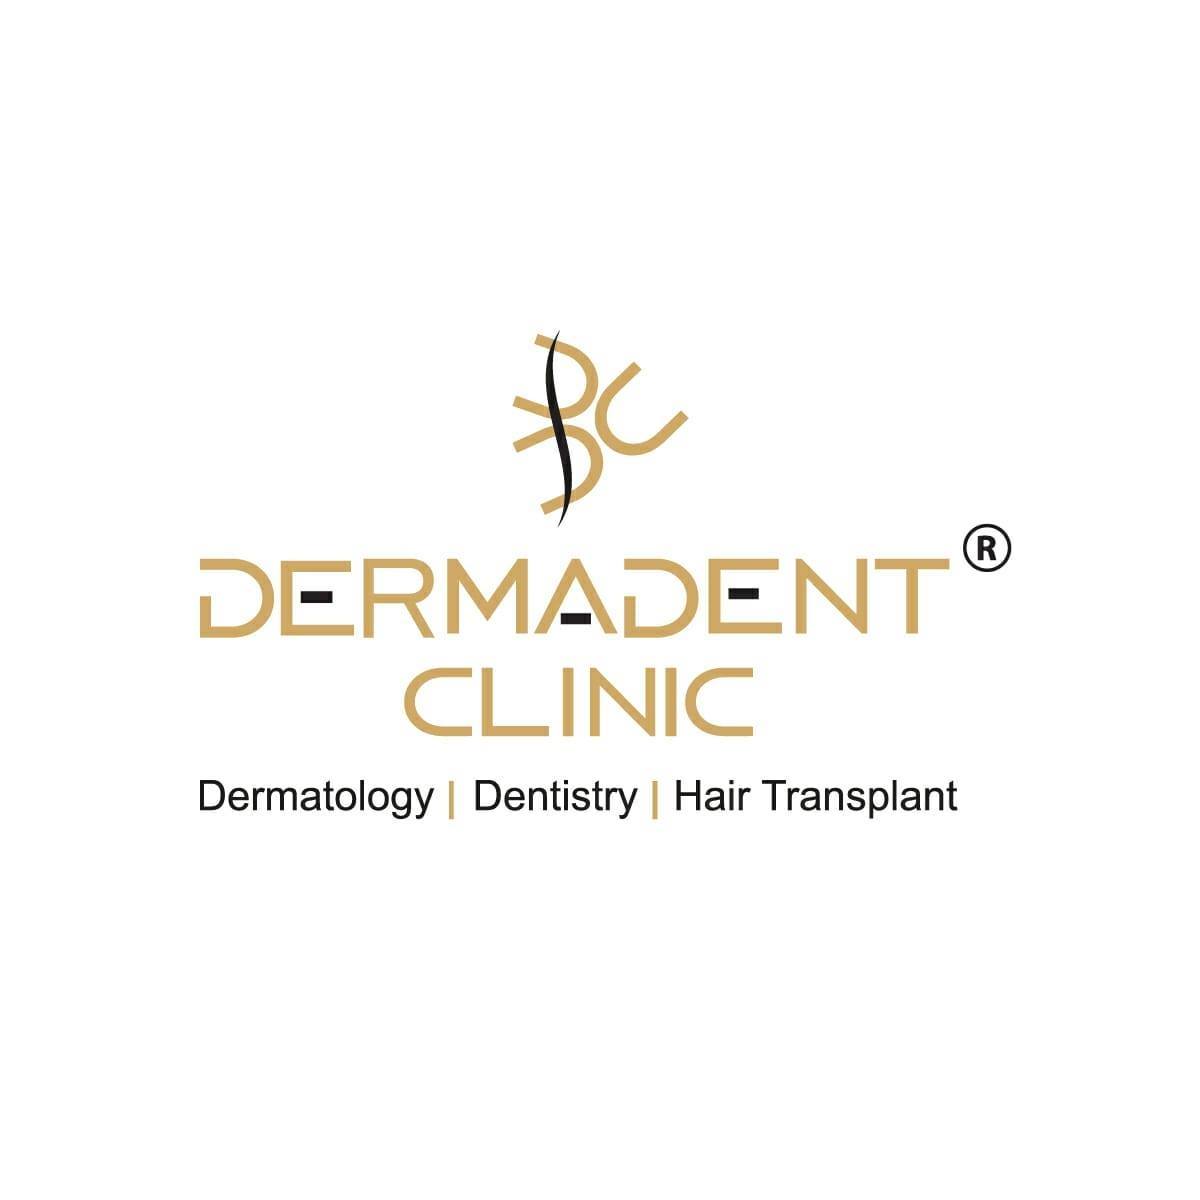 DermaDent Clinic|Clinics|Medical Services